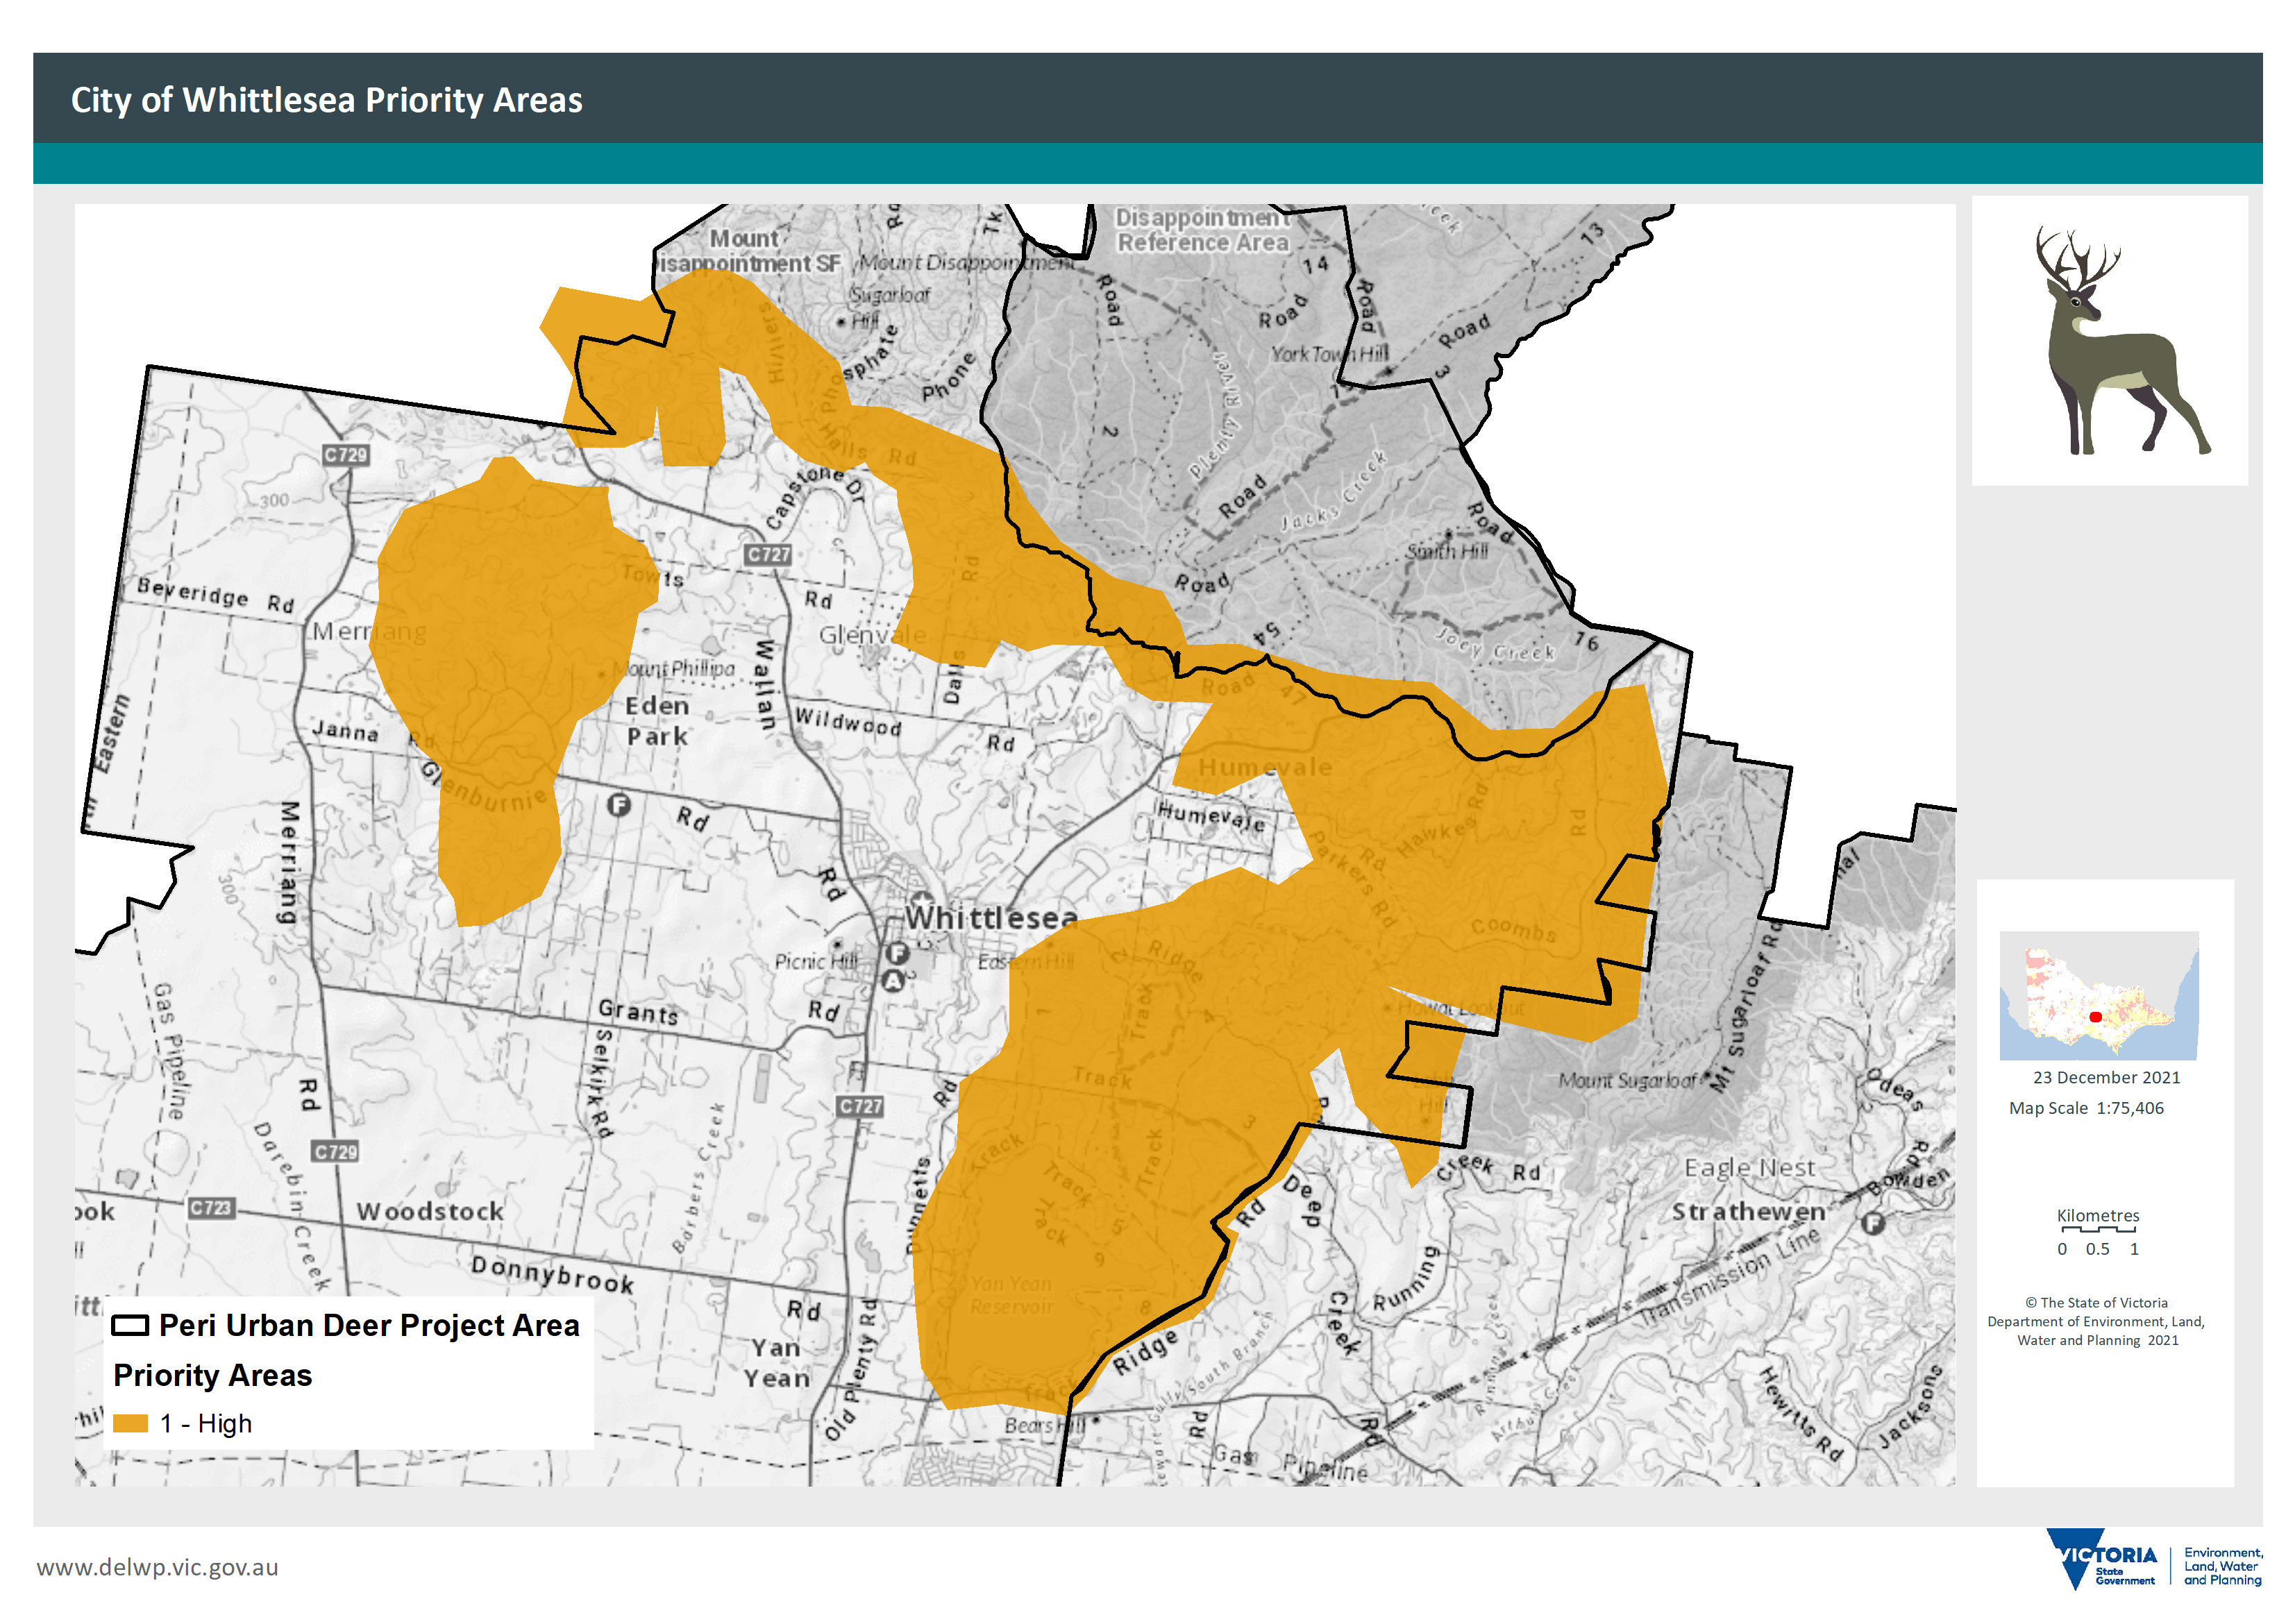 Figure 7: City of Whittlesea area priority areas for deer control